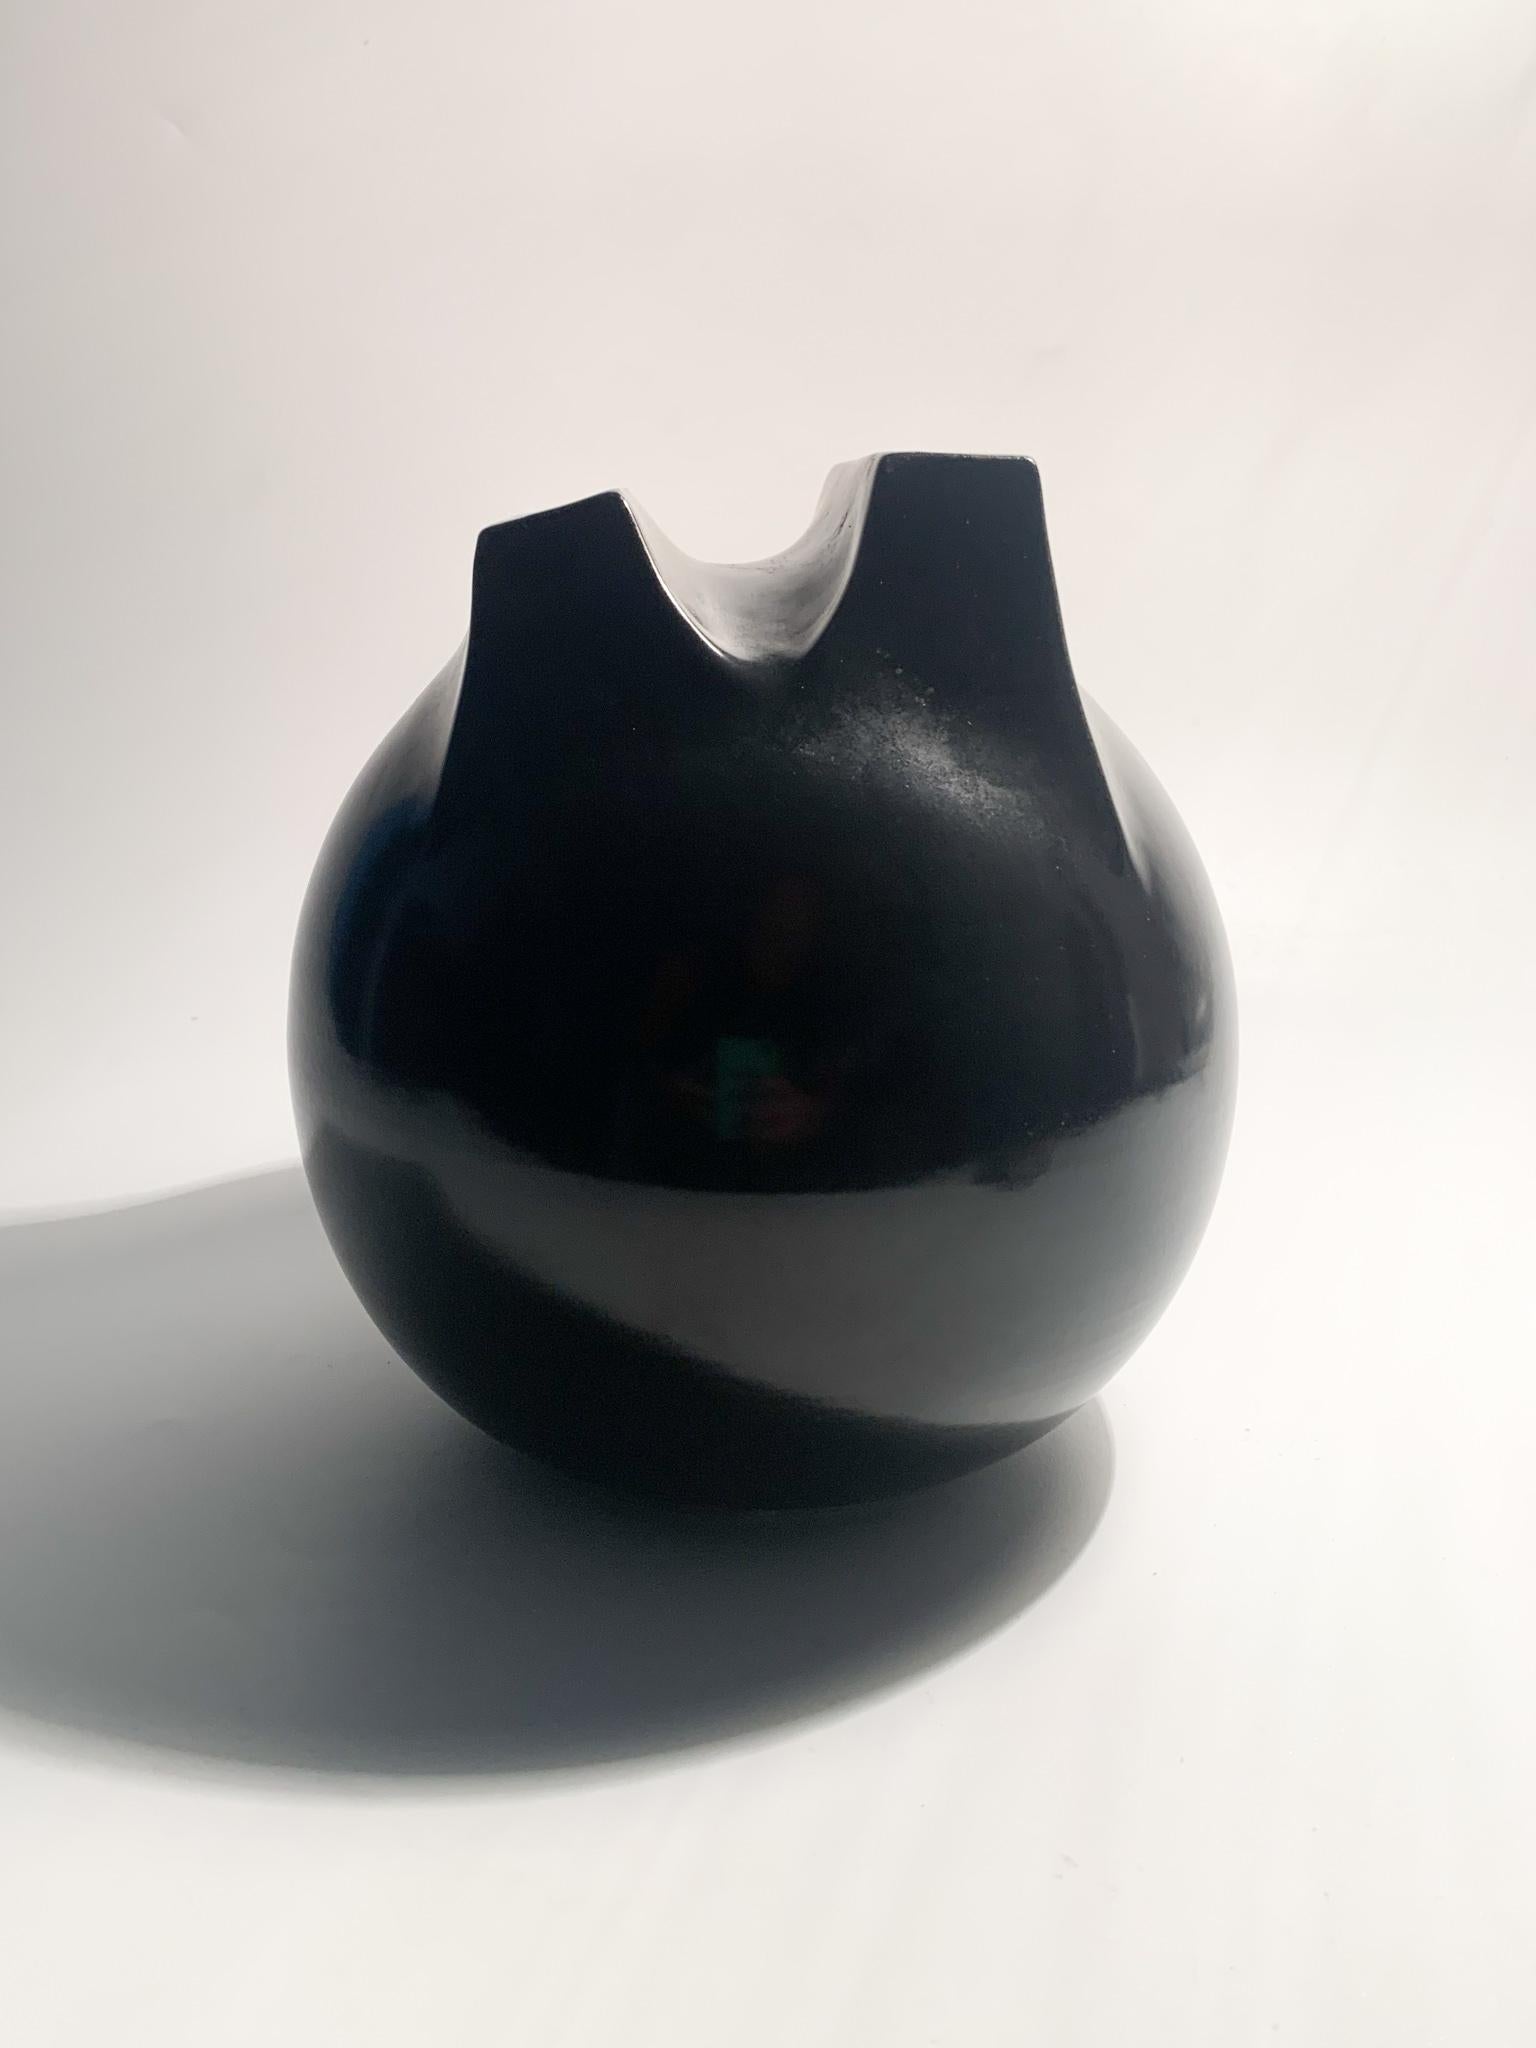 Black ceramic vase, Whistle model with Double Mouth, made by Franco Bucci for Laboratorio Pesaro in the 1970s

diameter cm 16 h cm 18